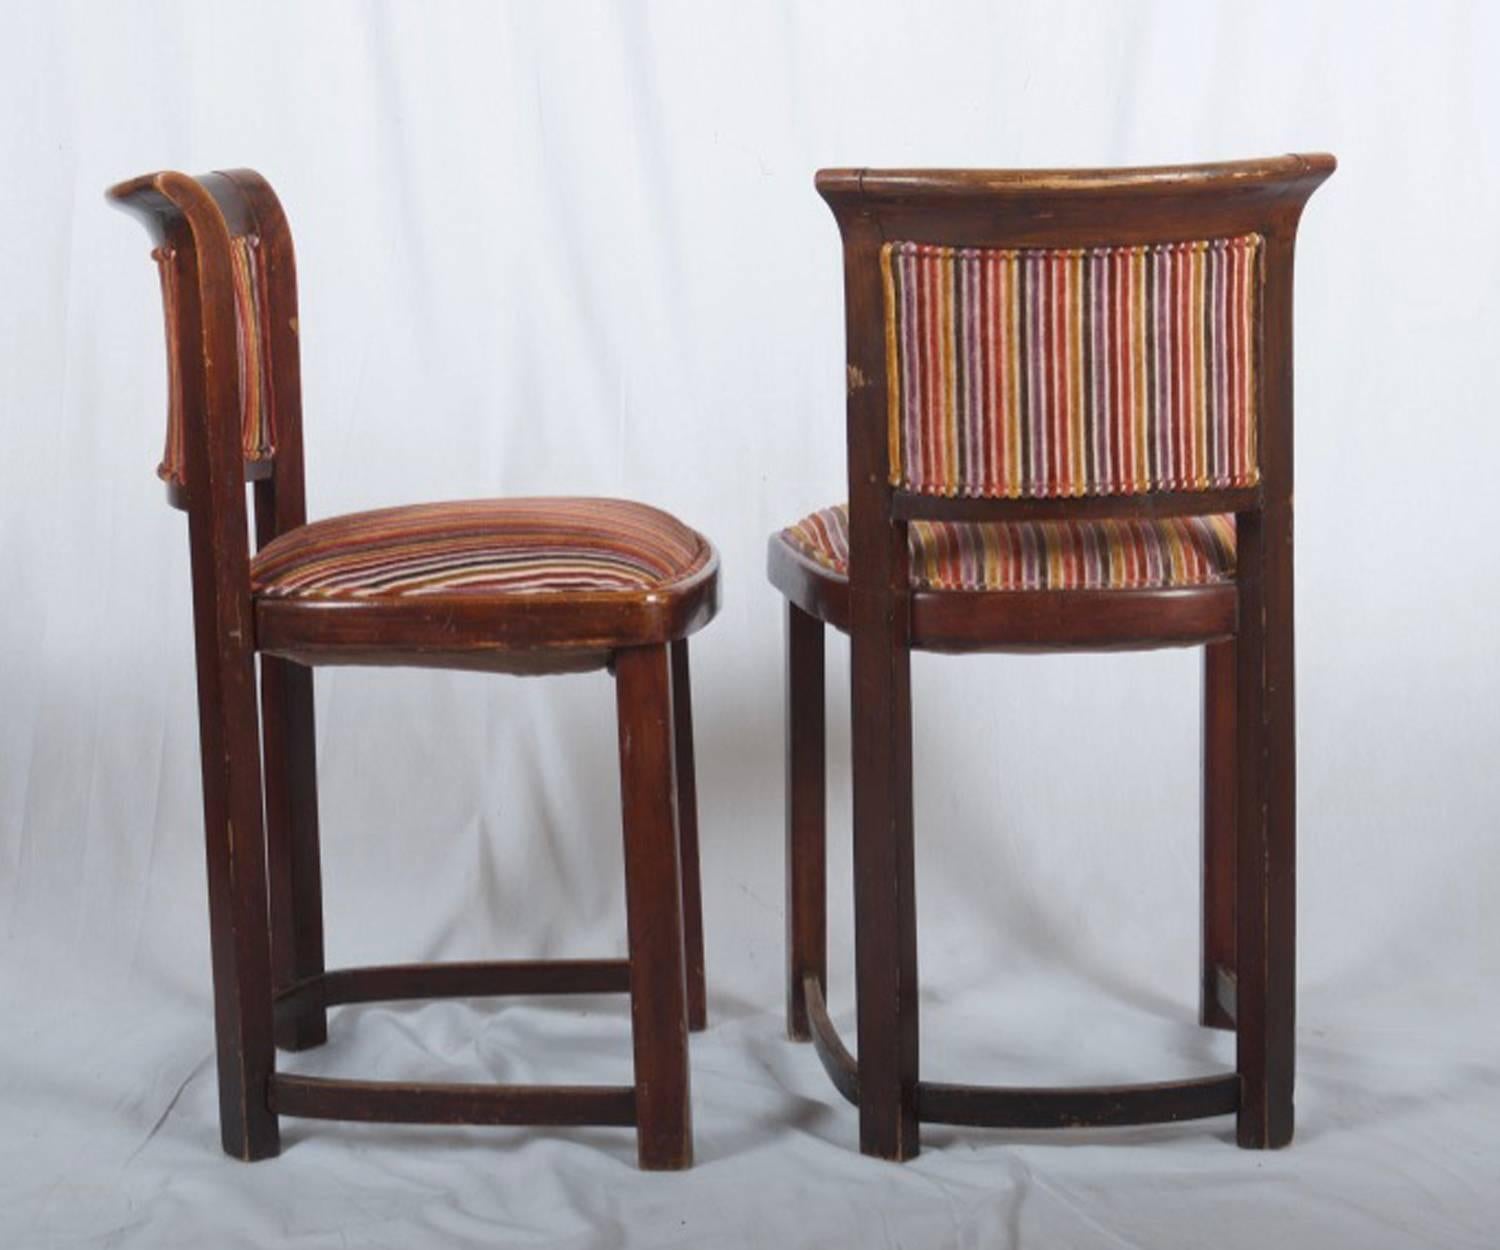 Austrian Very Rare Thonet Chairs Attributed to Josef Hoffmann For Sale